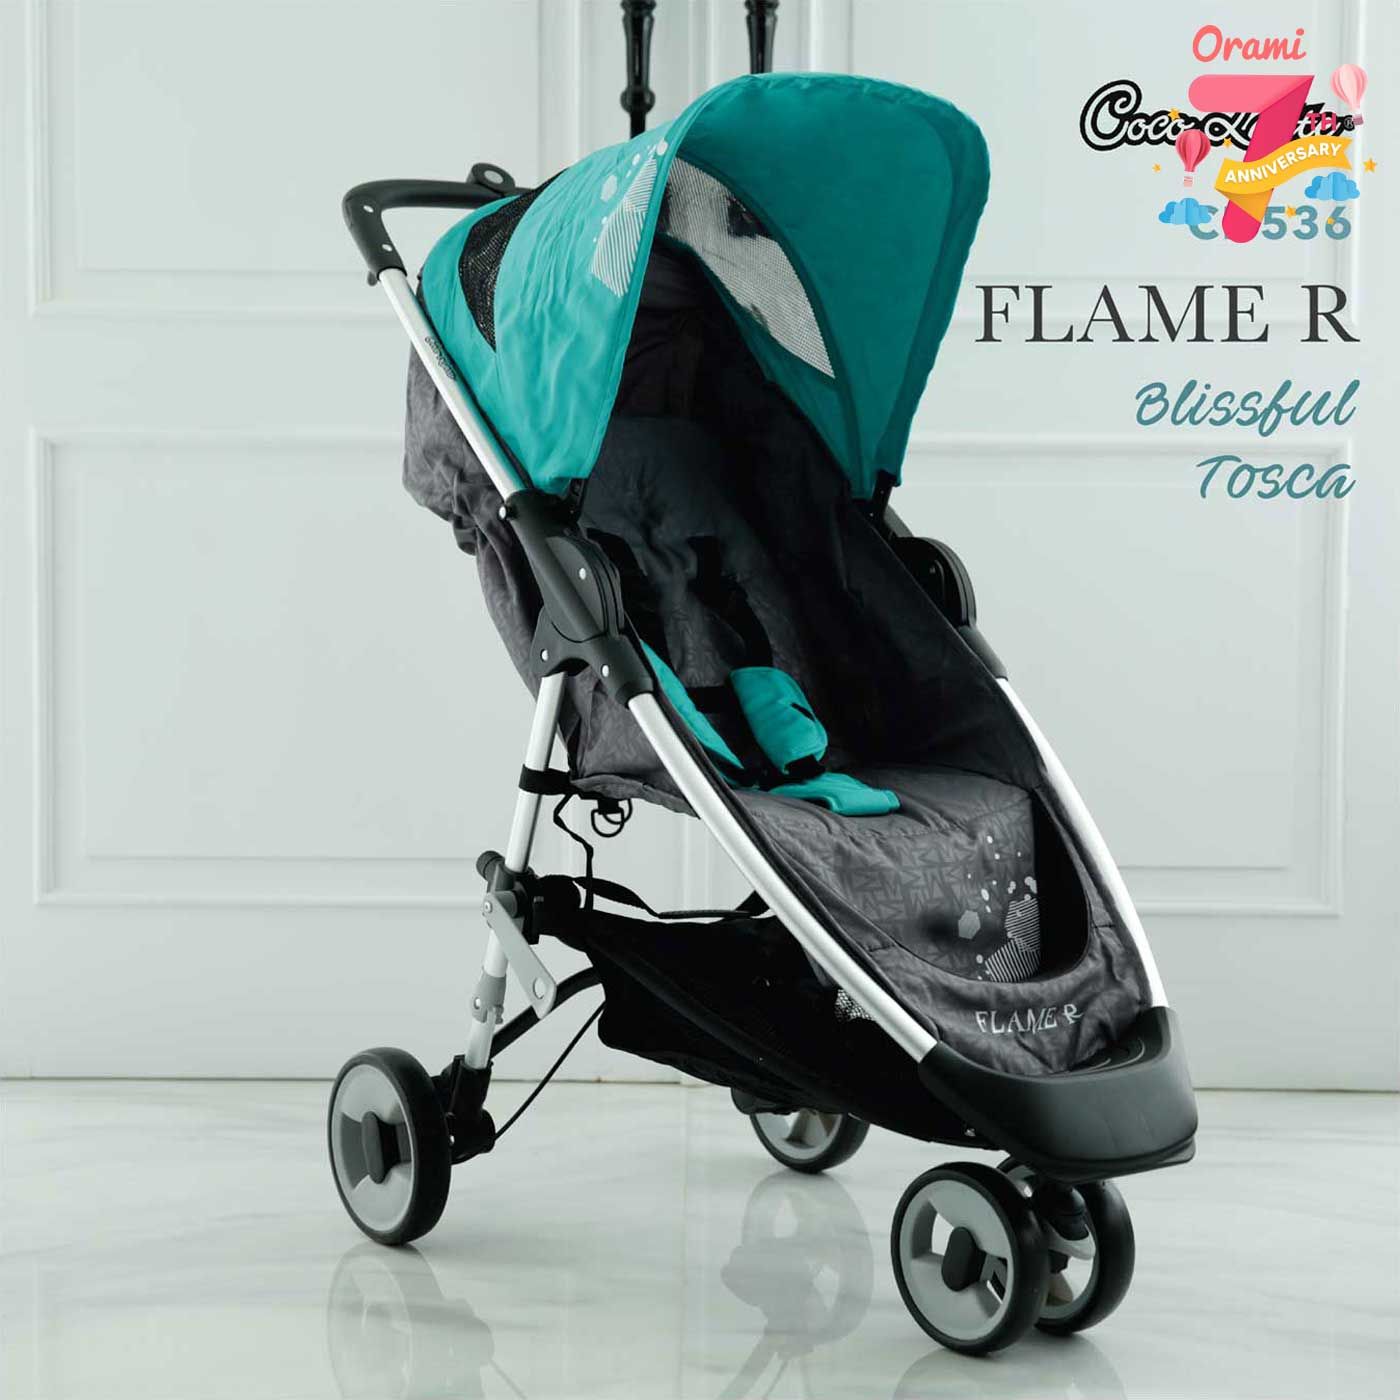 Promo Cocolatte Stroller CL 536 Flame R- Blissful Tosca - 1